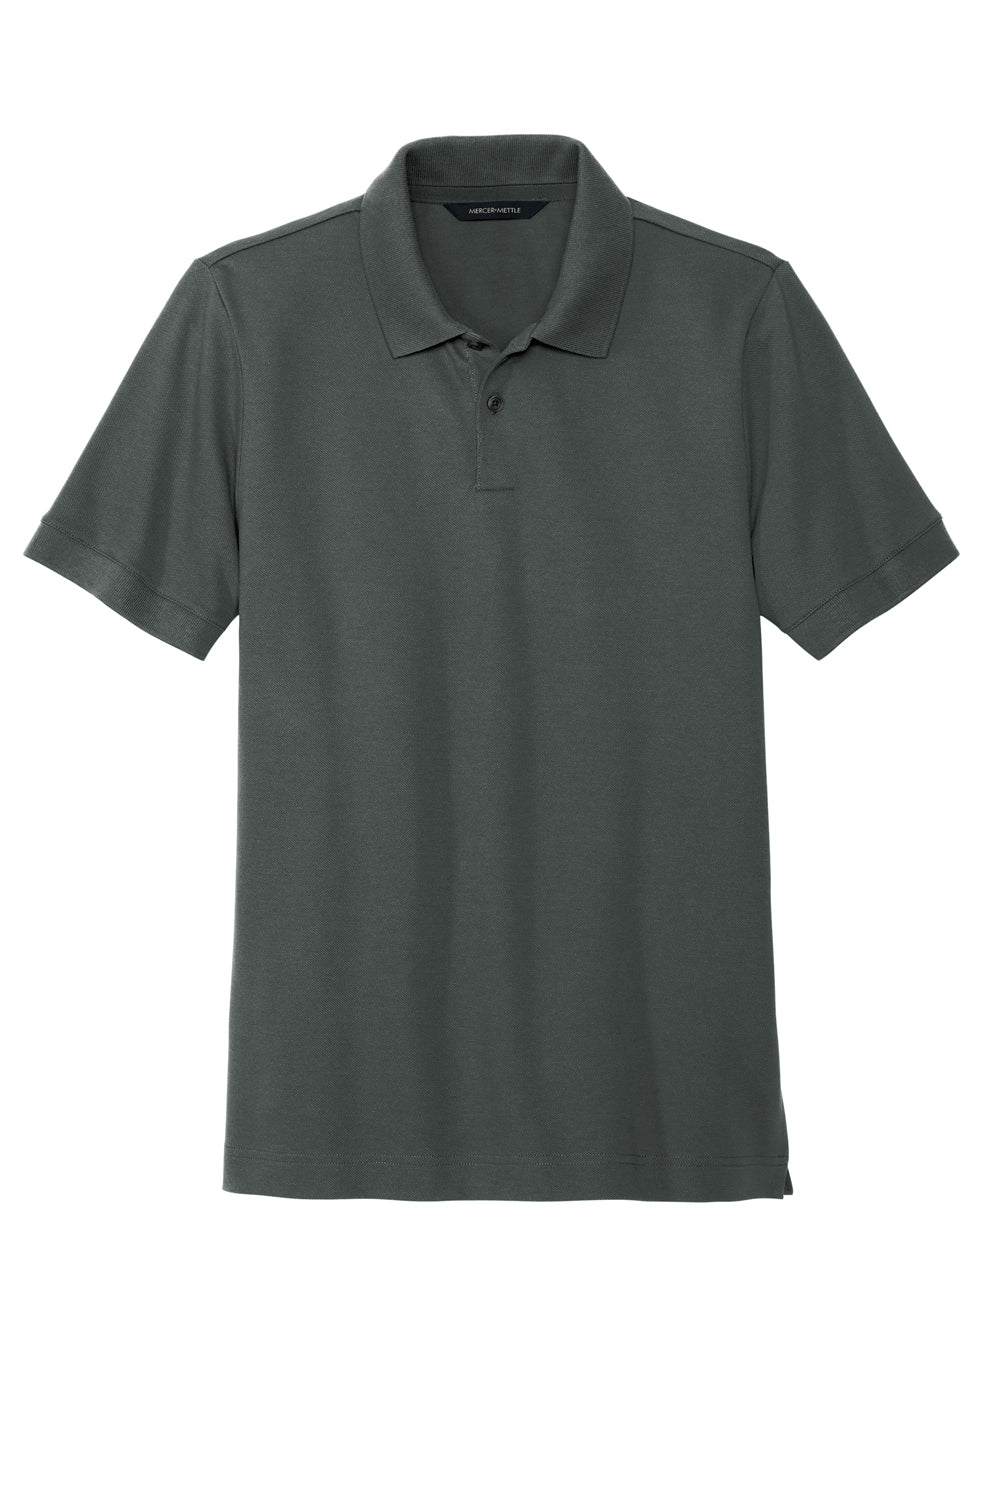 Mercer+Mettle MM1000 Stretch Pique Short Sleeve Polo Shirt Anchor Grey Flat Front